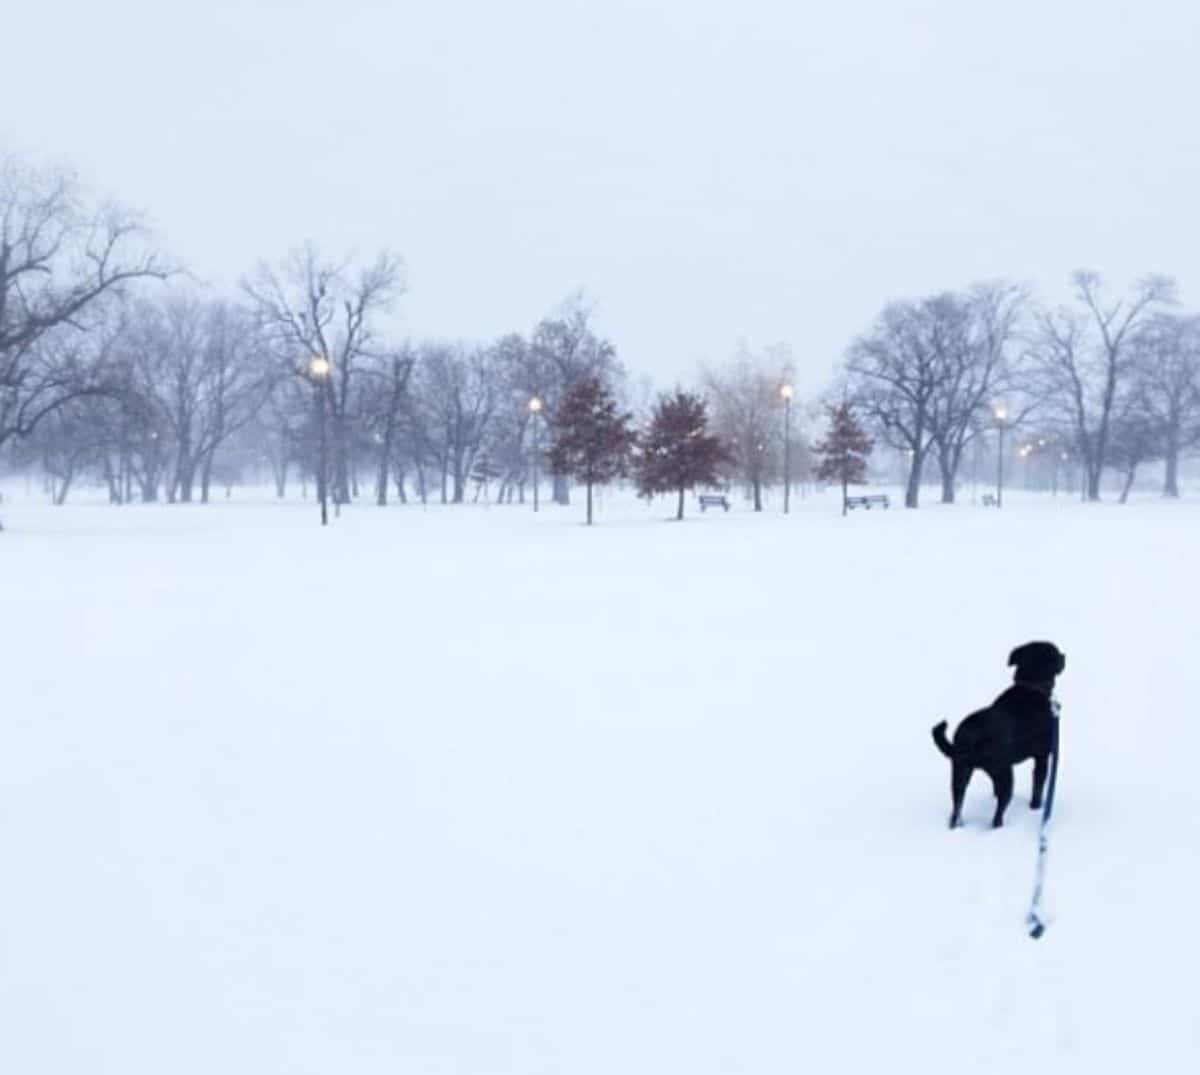 black dog on a leash standing on snow